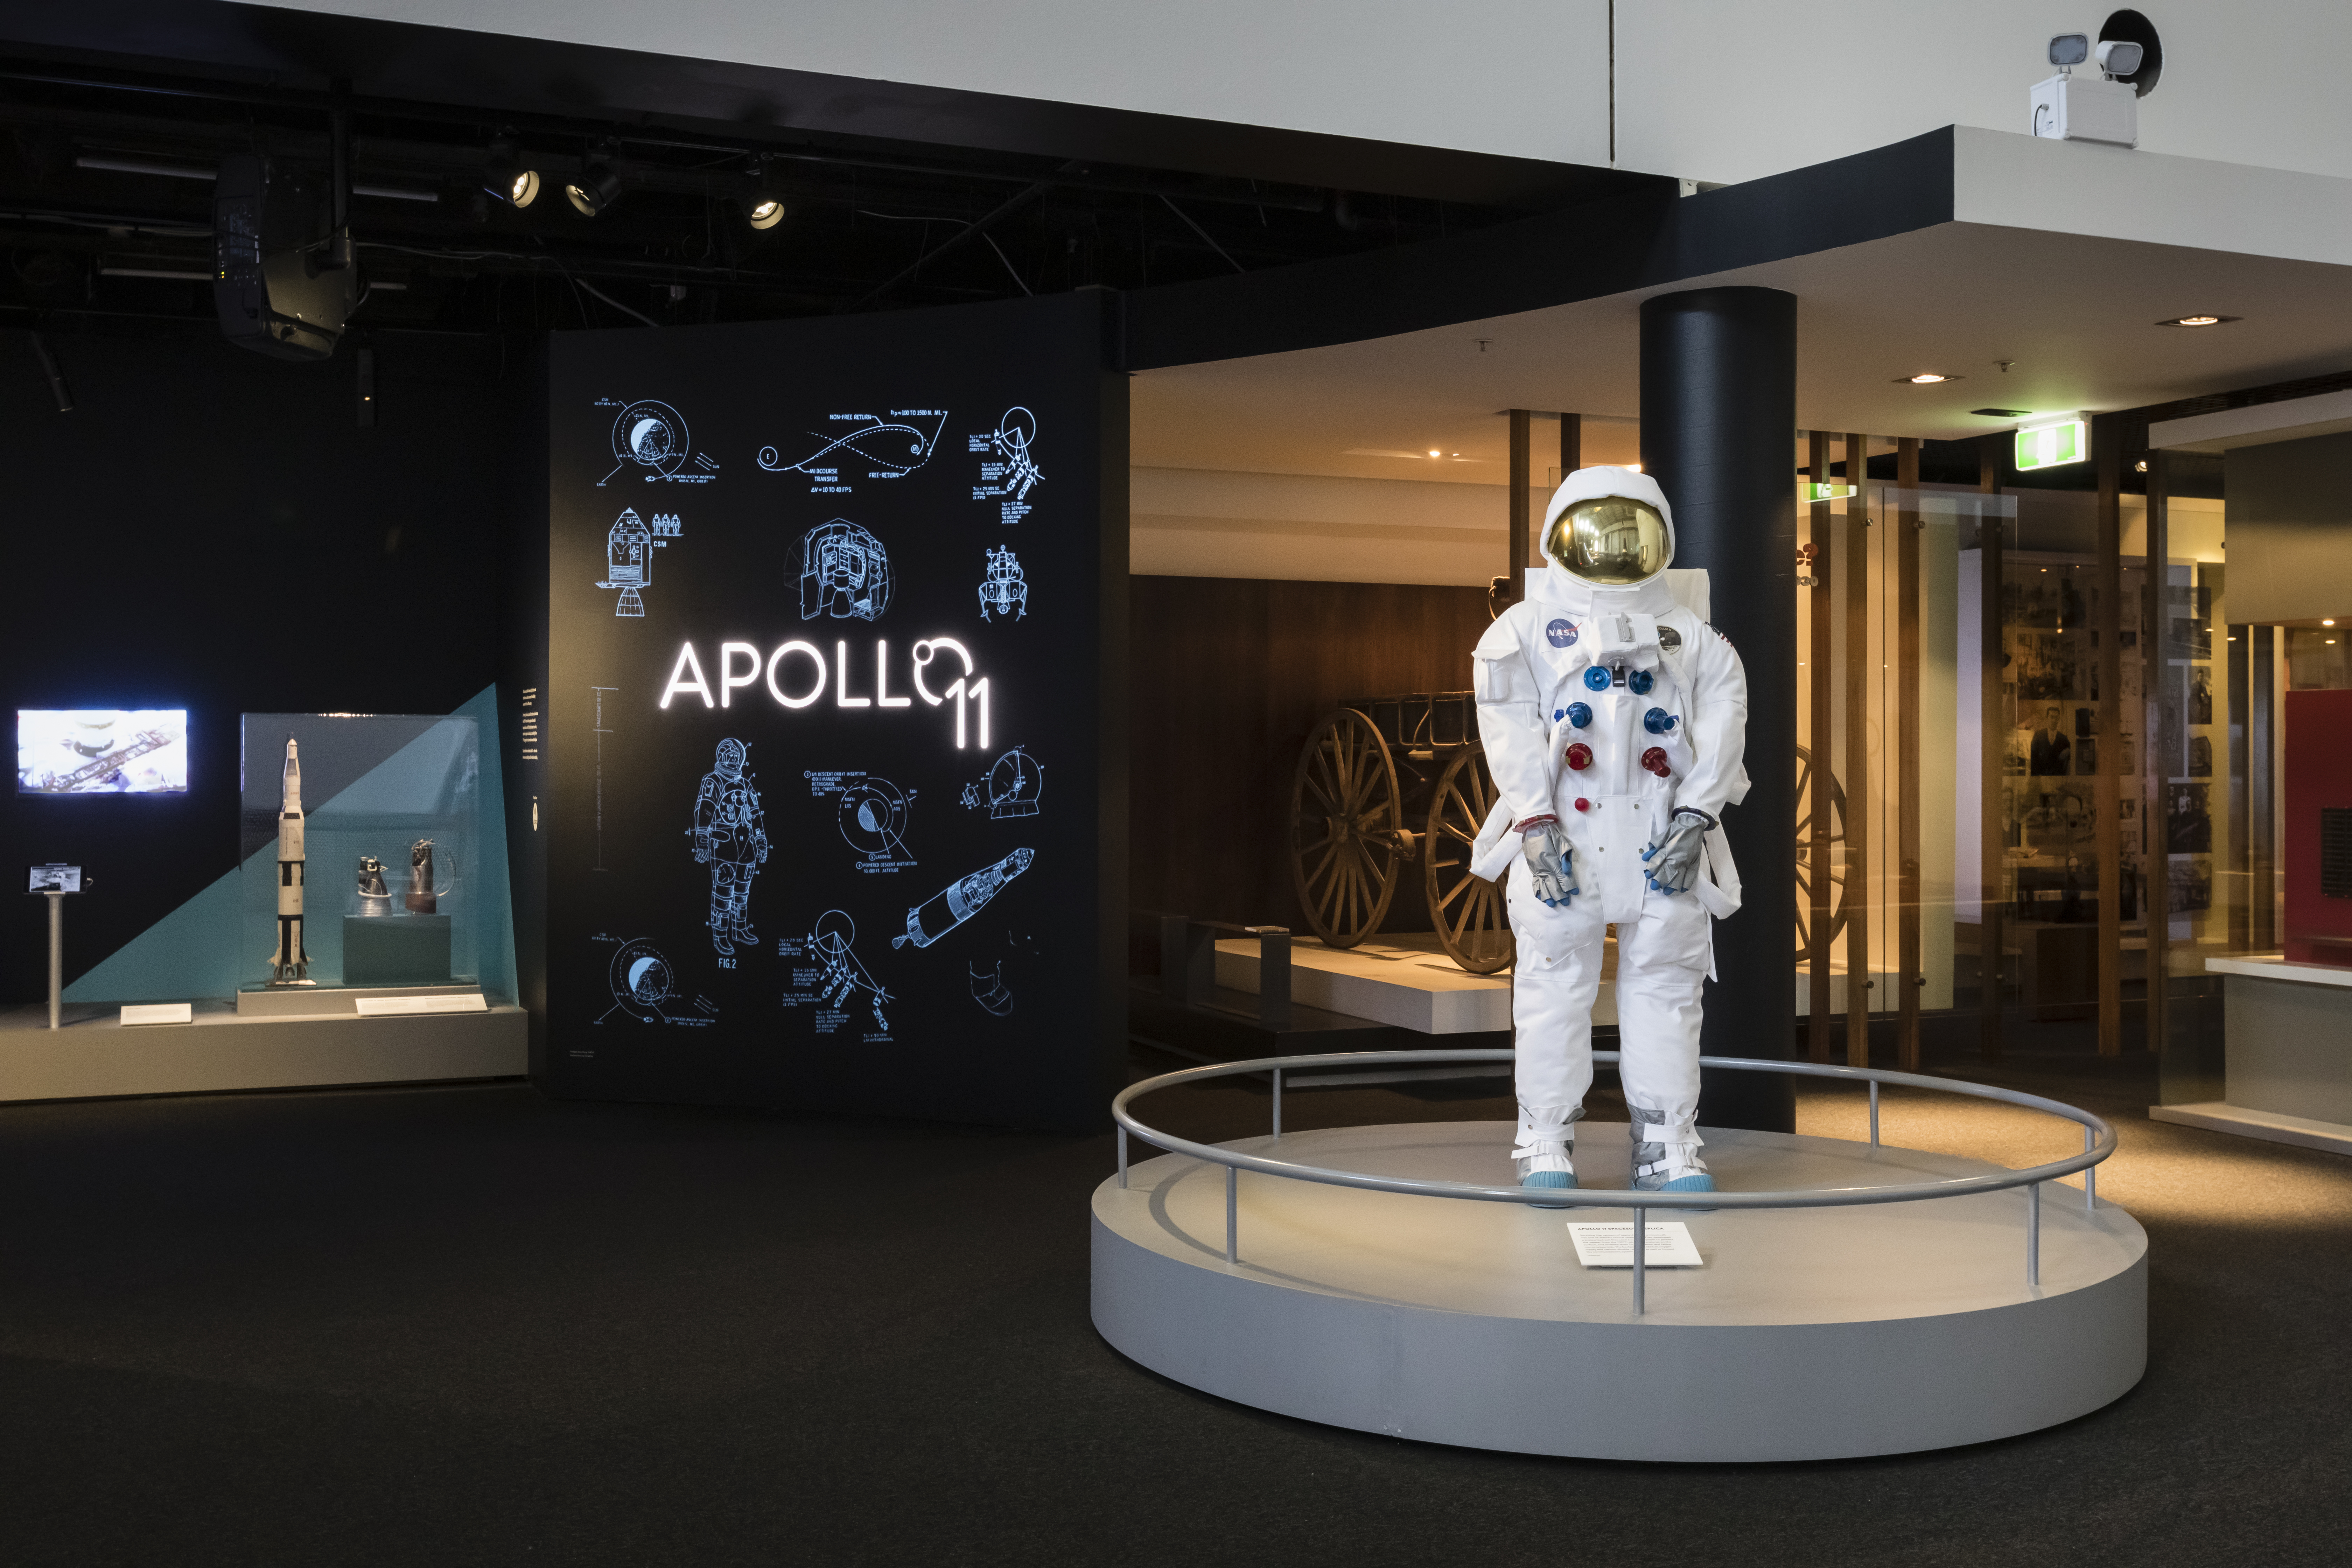 A mannequin wearing a space suit stands on a silver circular plinth. To the left is a title wall reading 'Apollo 11' with diagrams of spacecraft around it.